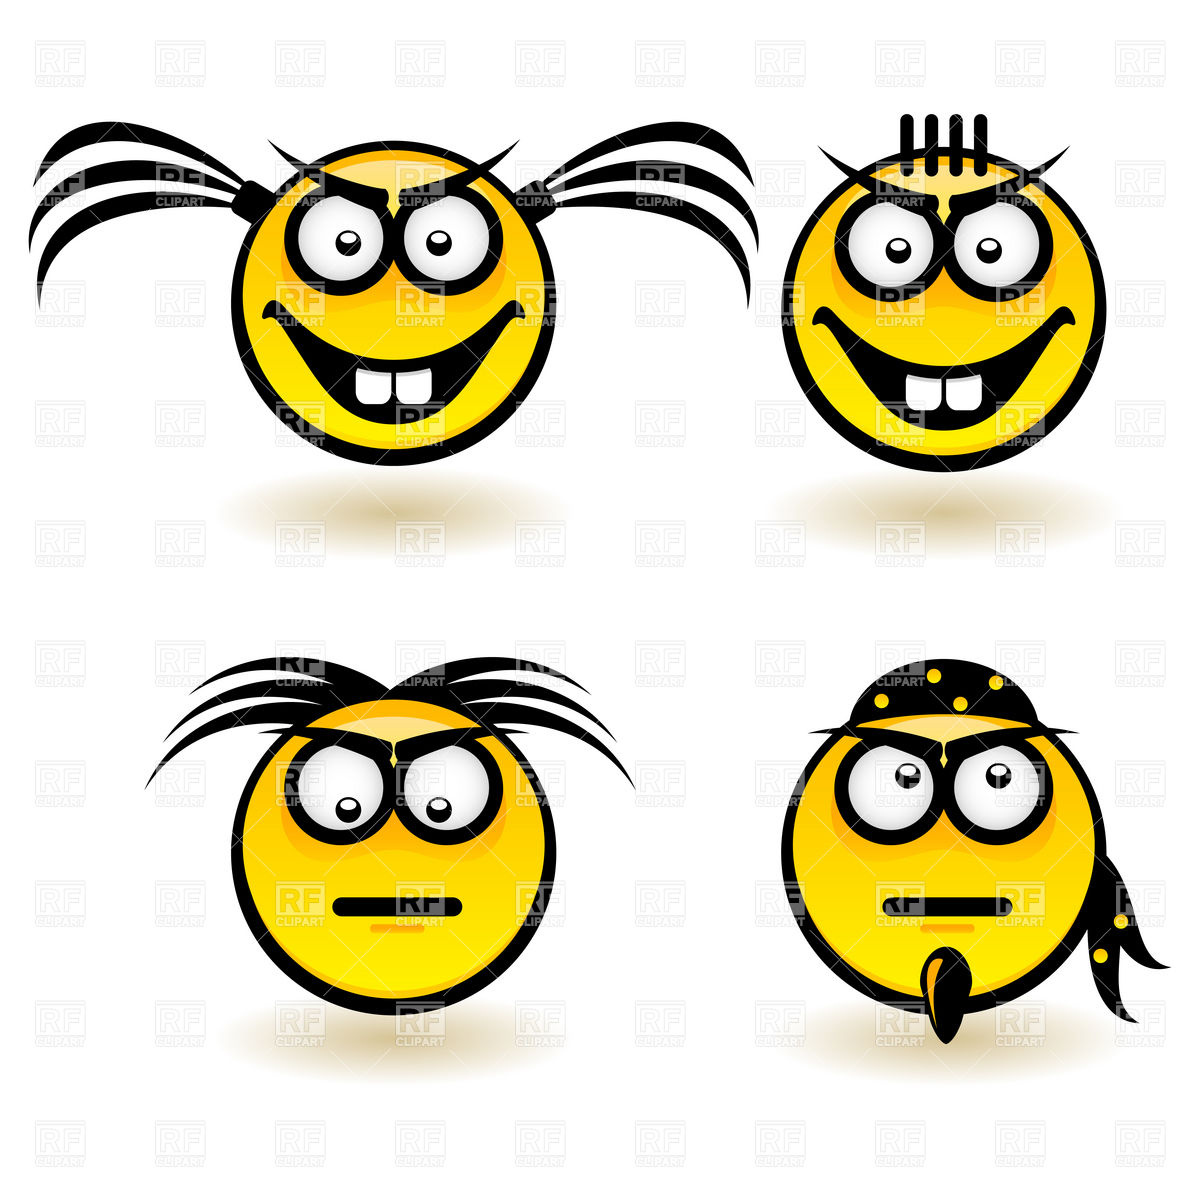 Cartoon Smiley Face Icons With Emotions  Serious And Cheerful  7750    